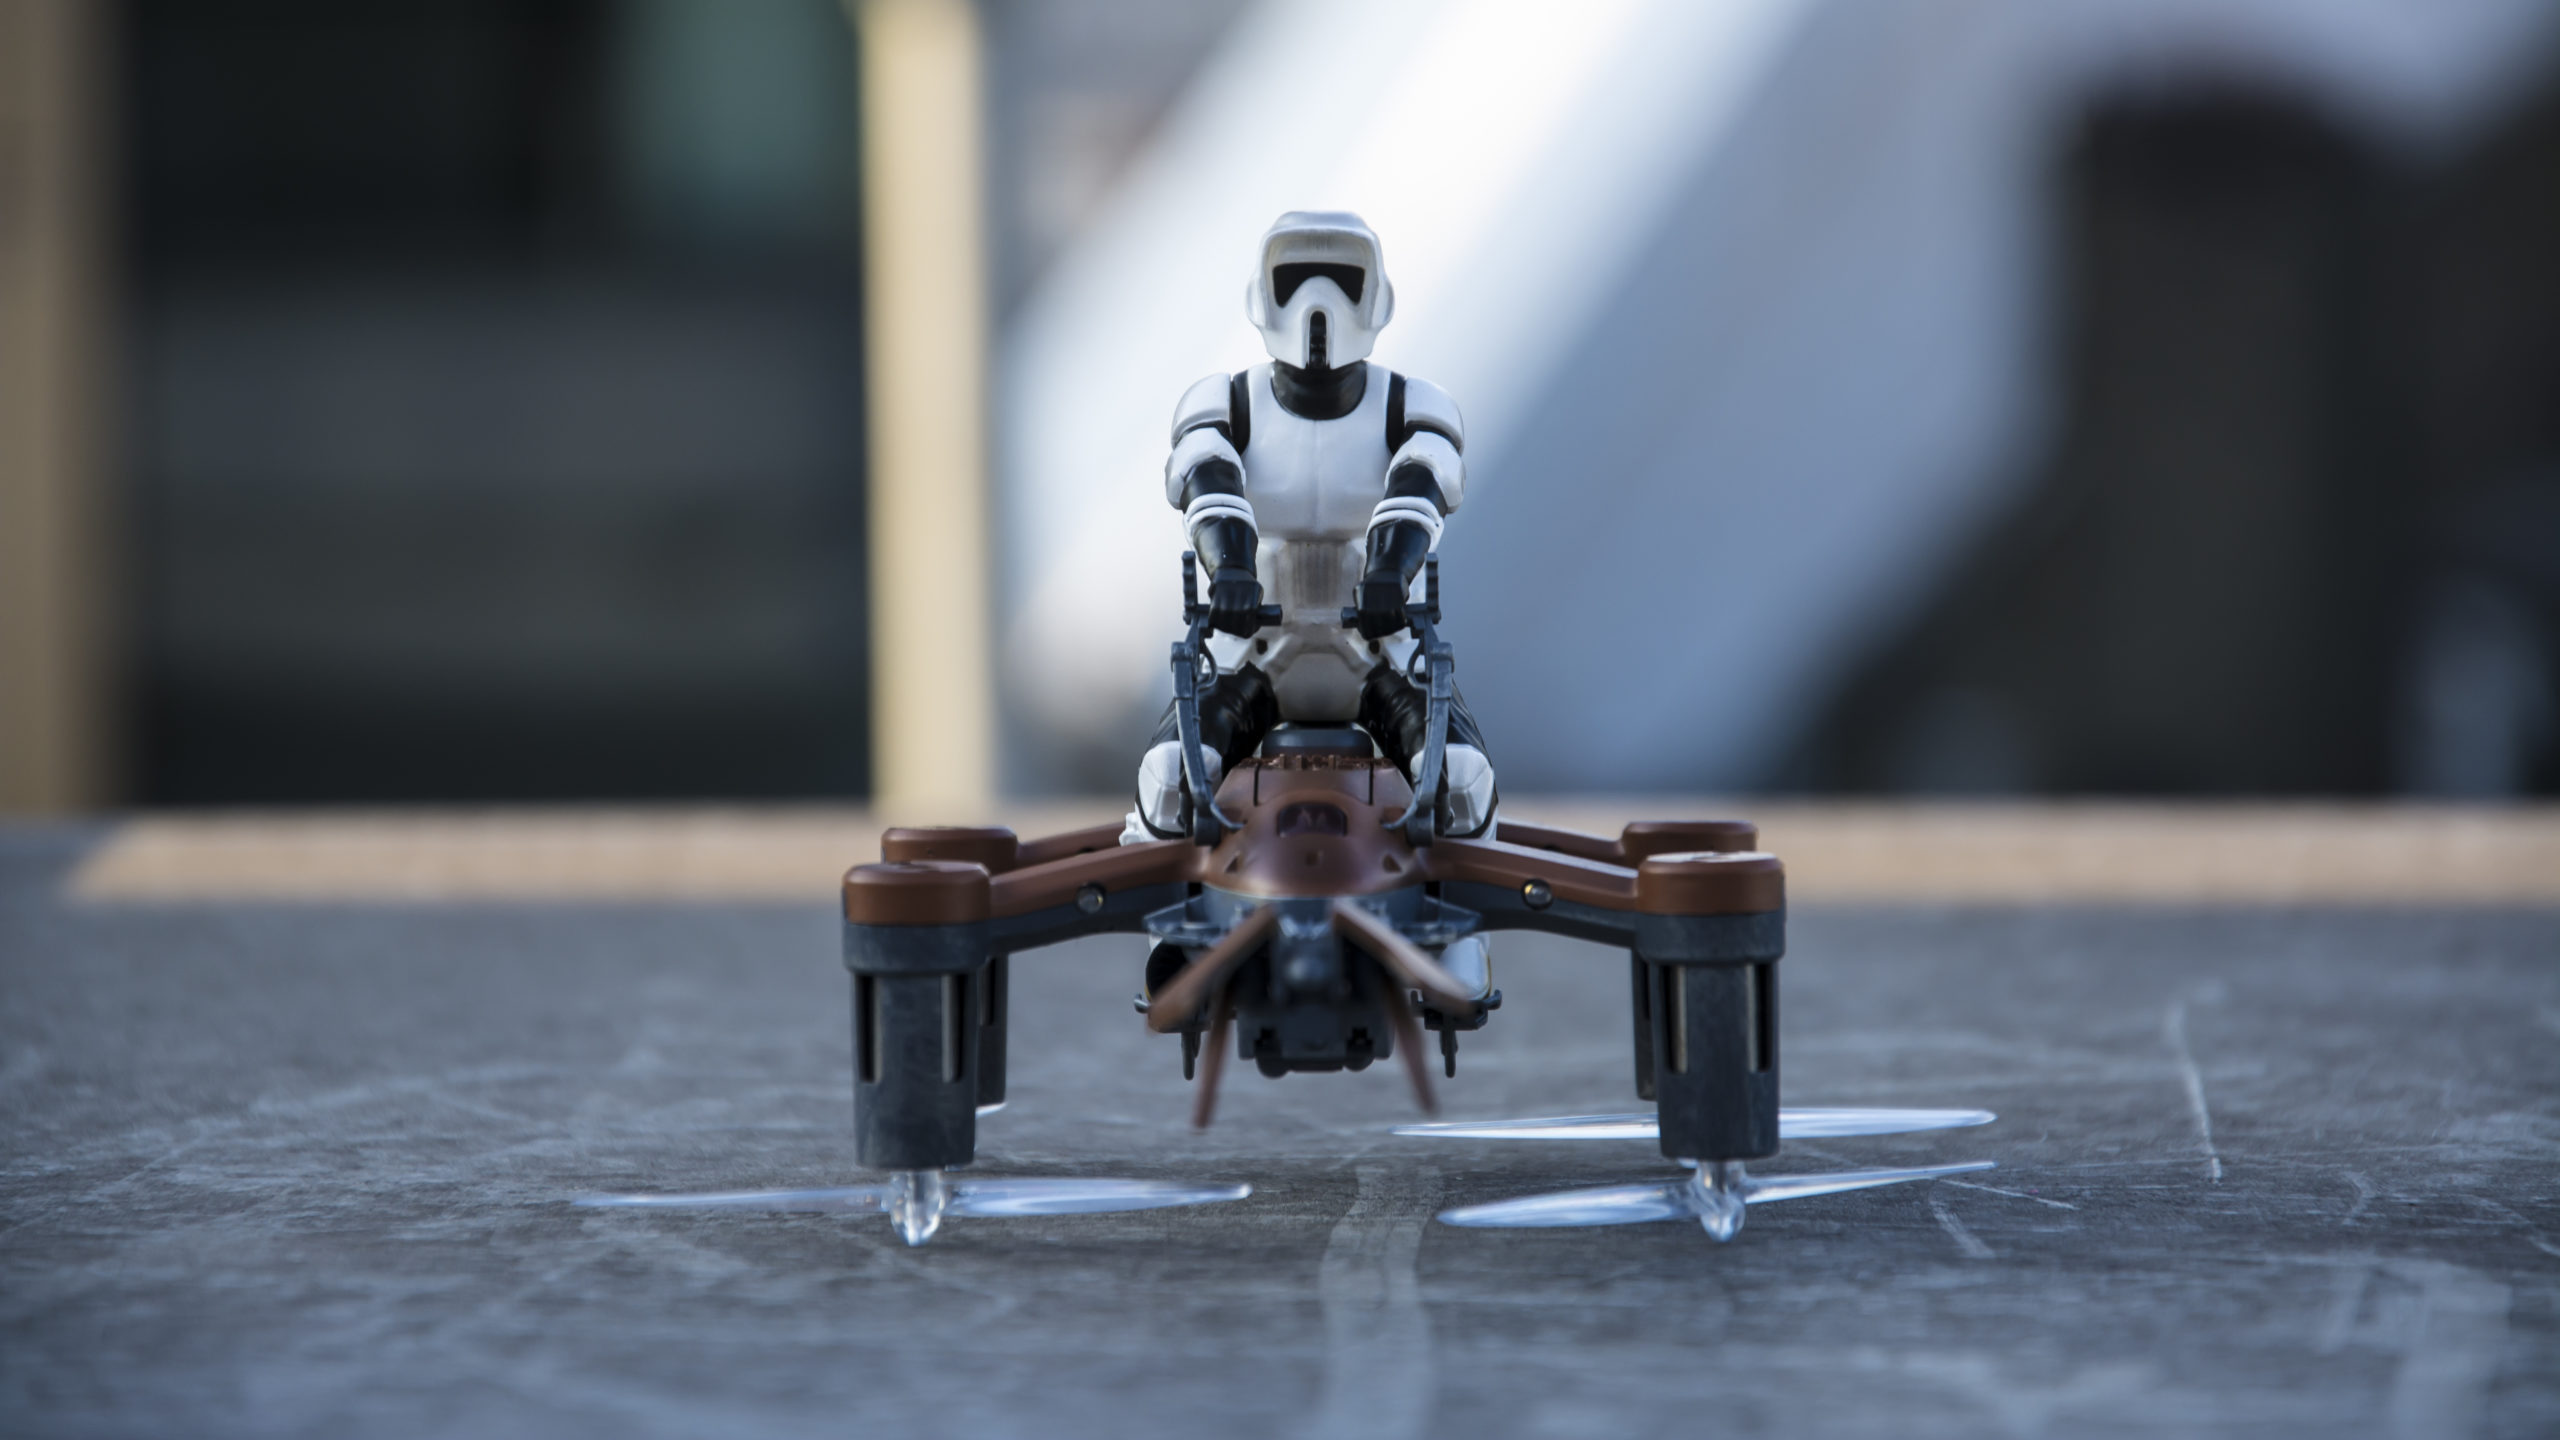 Star Wars Propel Battle Drone review: Go Rogue with one of the last-minute Christmas gifts around